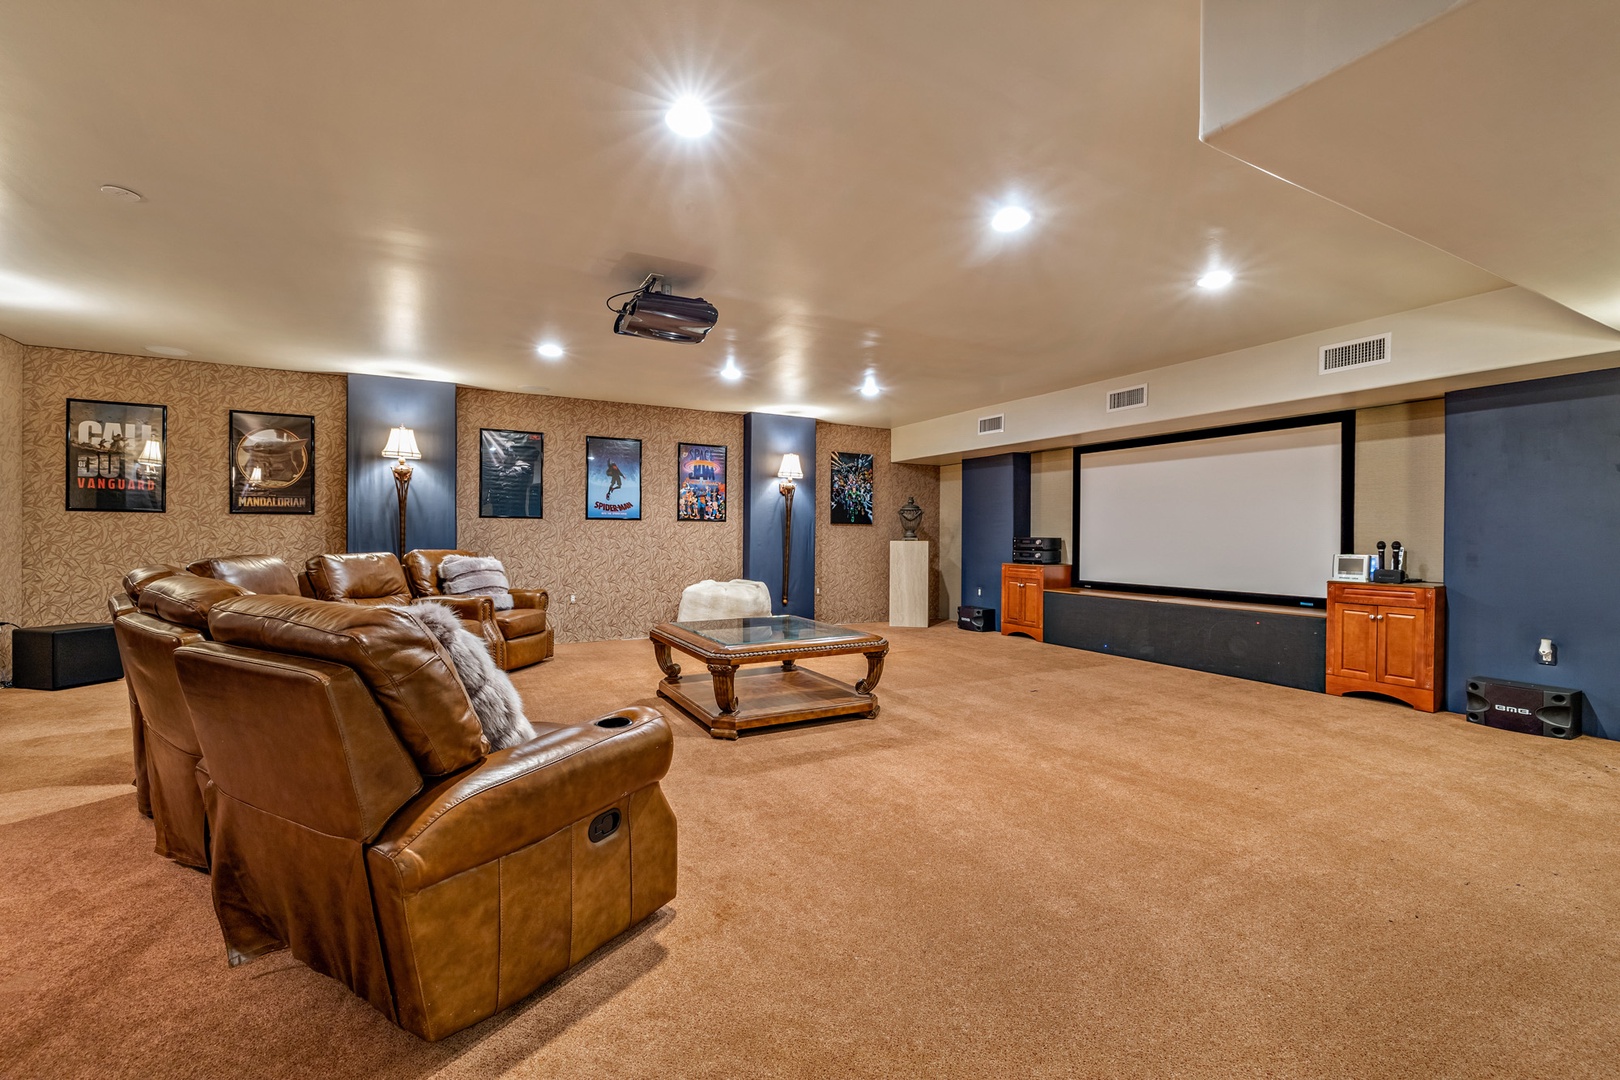 Honolulu Vacation Rentals, La Villa Kahala - The theater room offers the perfect space for indoor entertainment